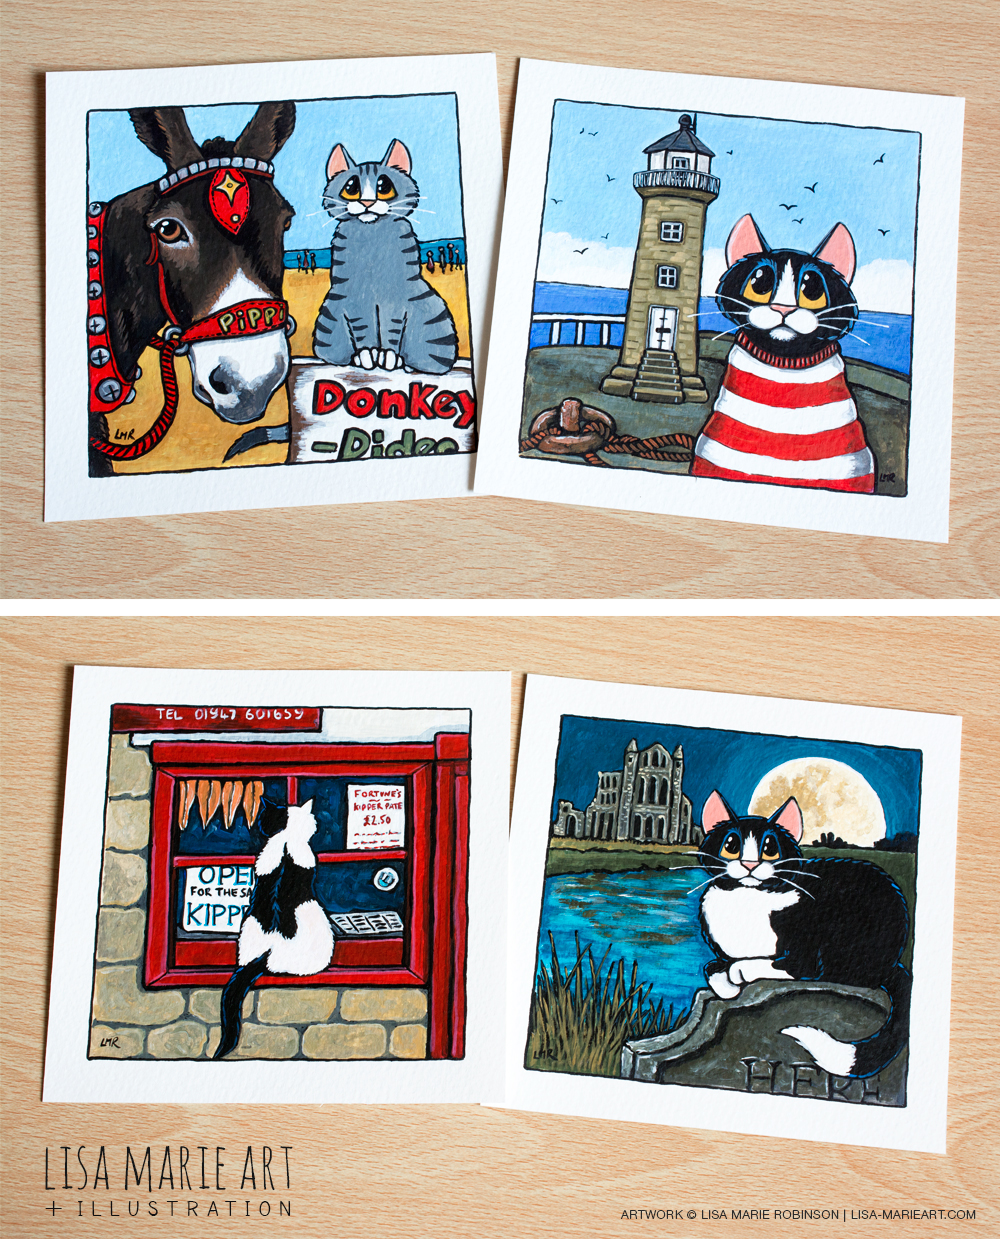 Whimsical Cat Illustrations at Whitby Galleries May 2016